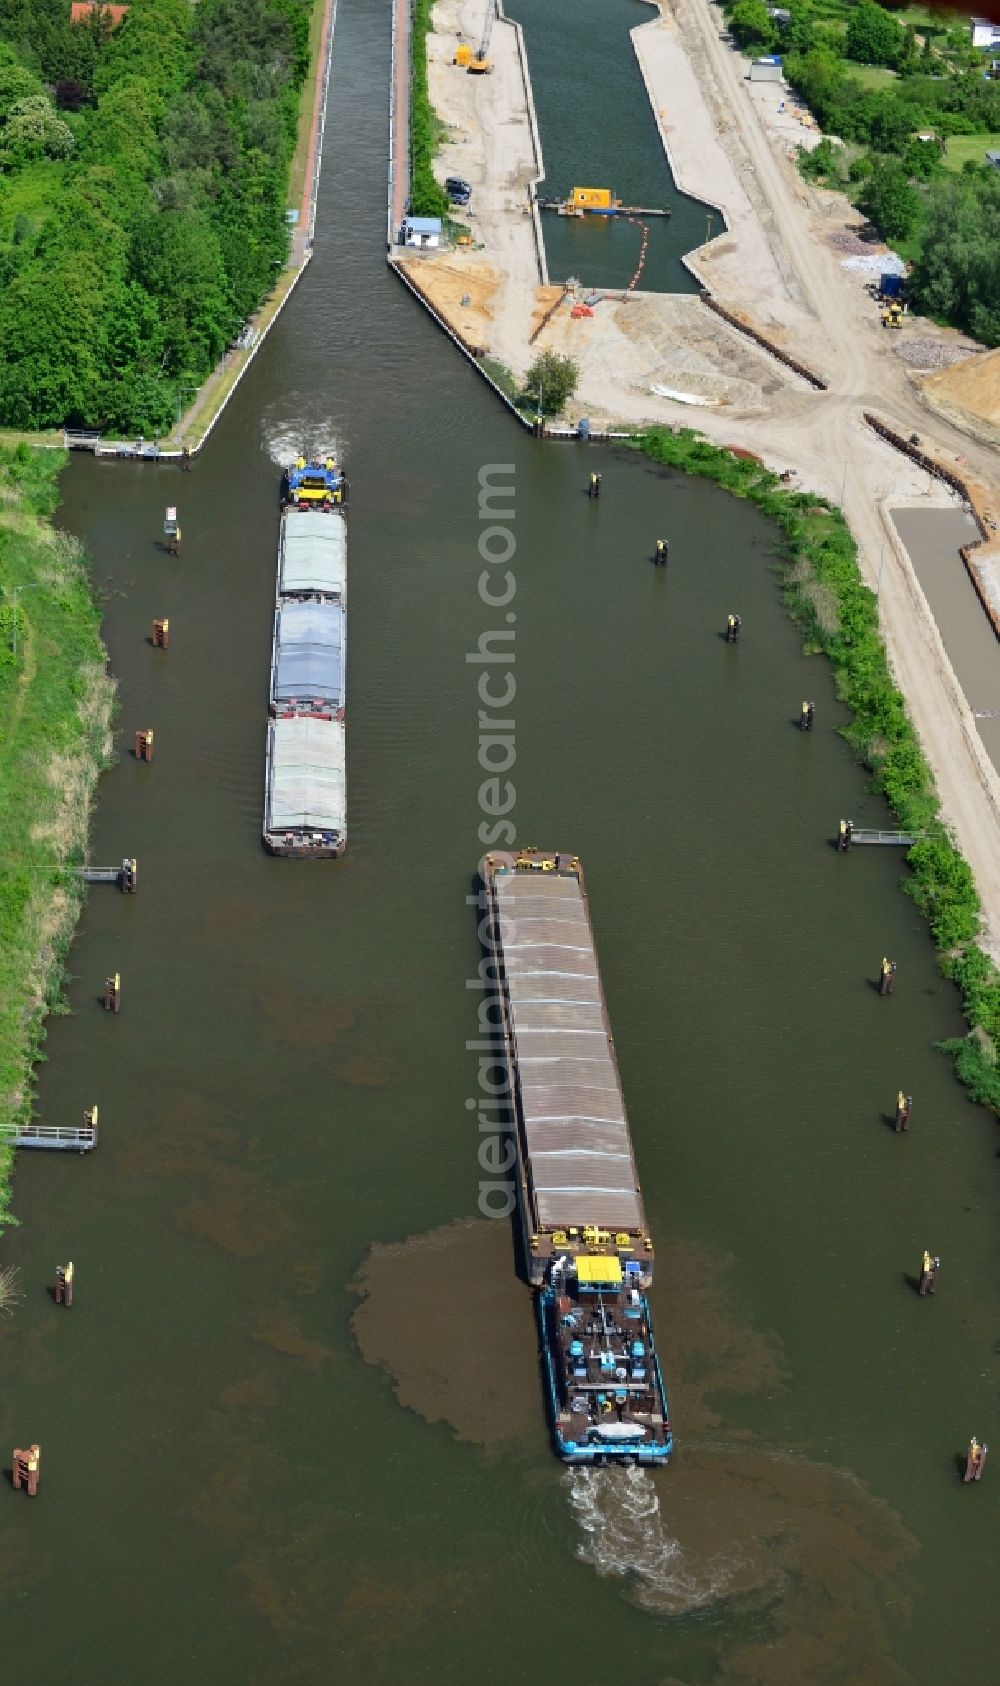 Zerben from above - Ship traffic of convoys in the area of ??Zerben lock on the waterway of the Elbe-Havel Canal in the state of Saxony-Anhalt